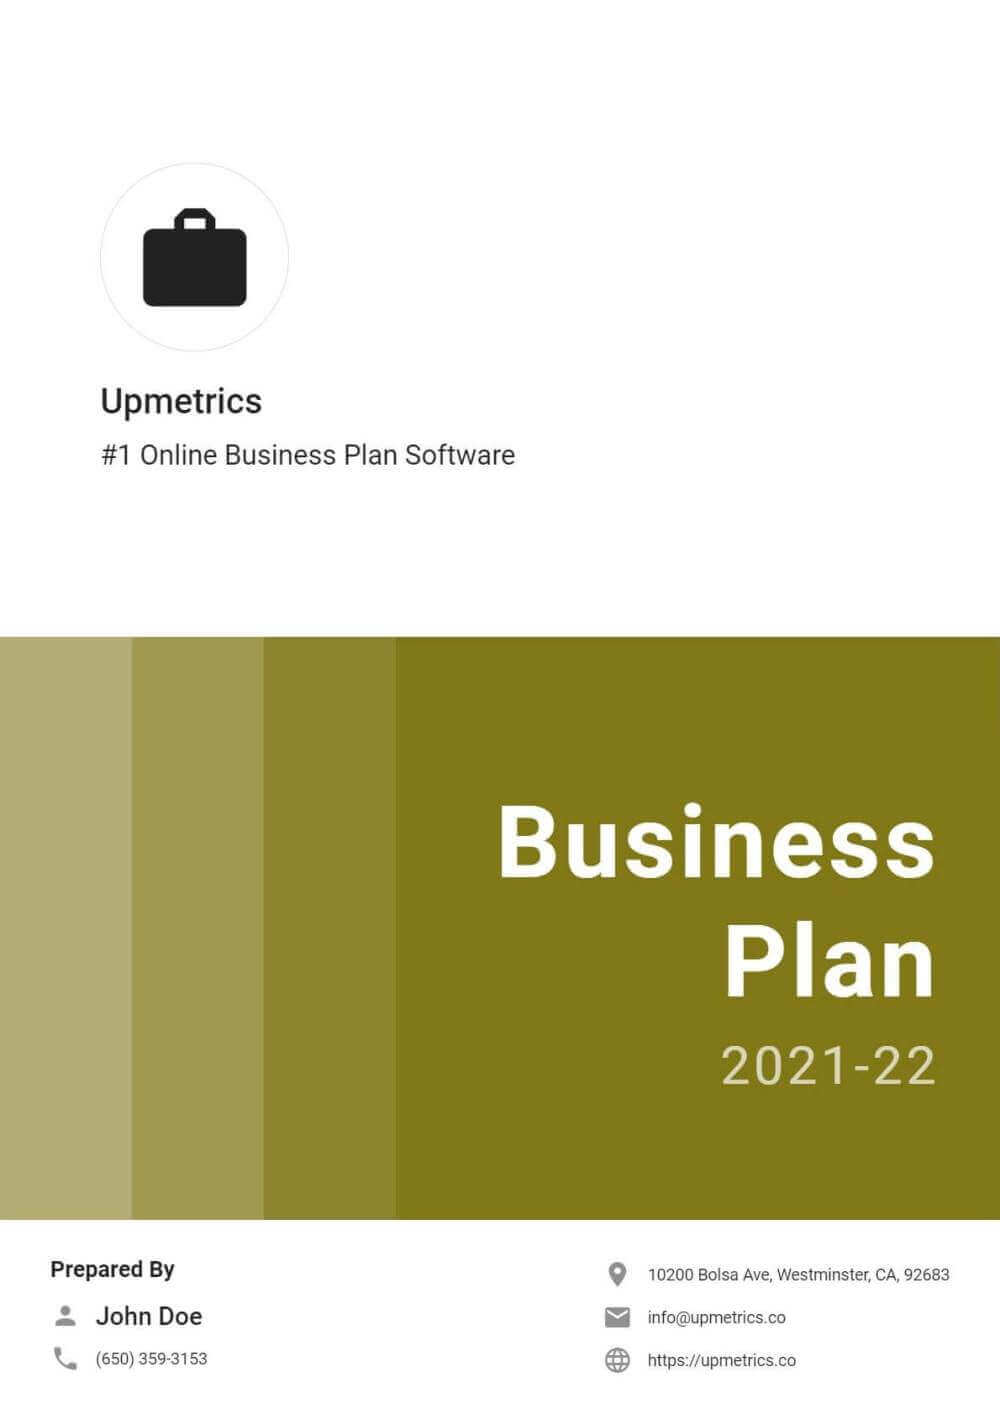 Business Plan Cover Page Design